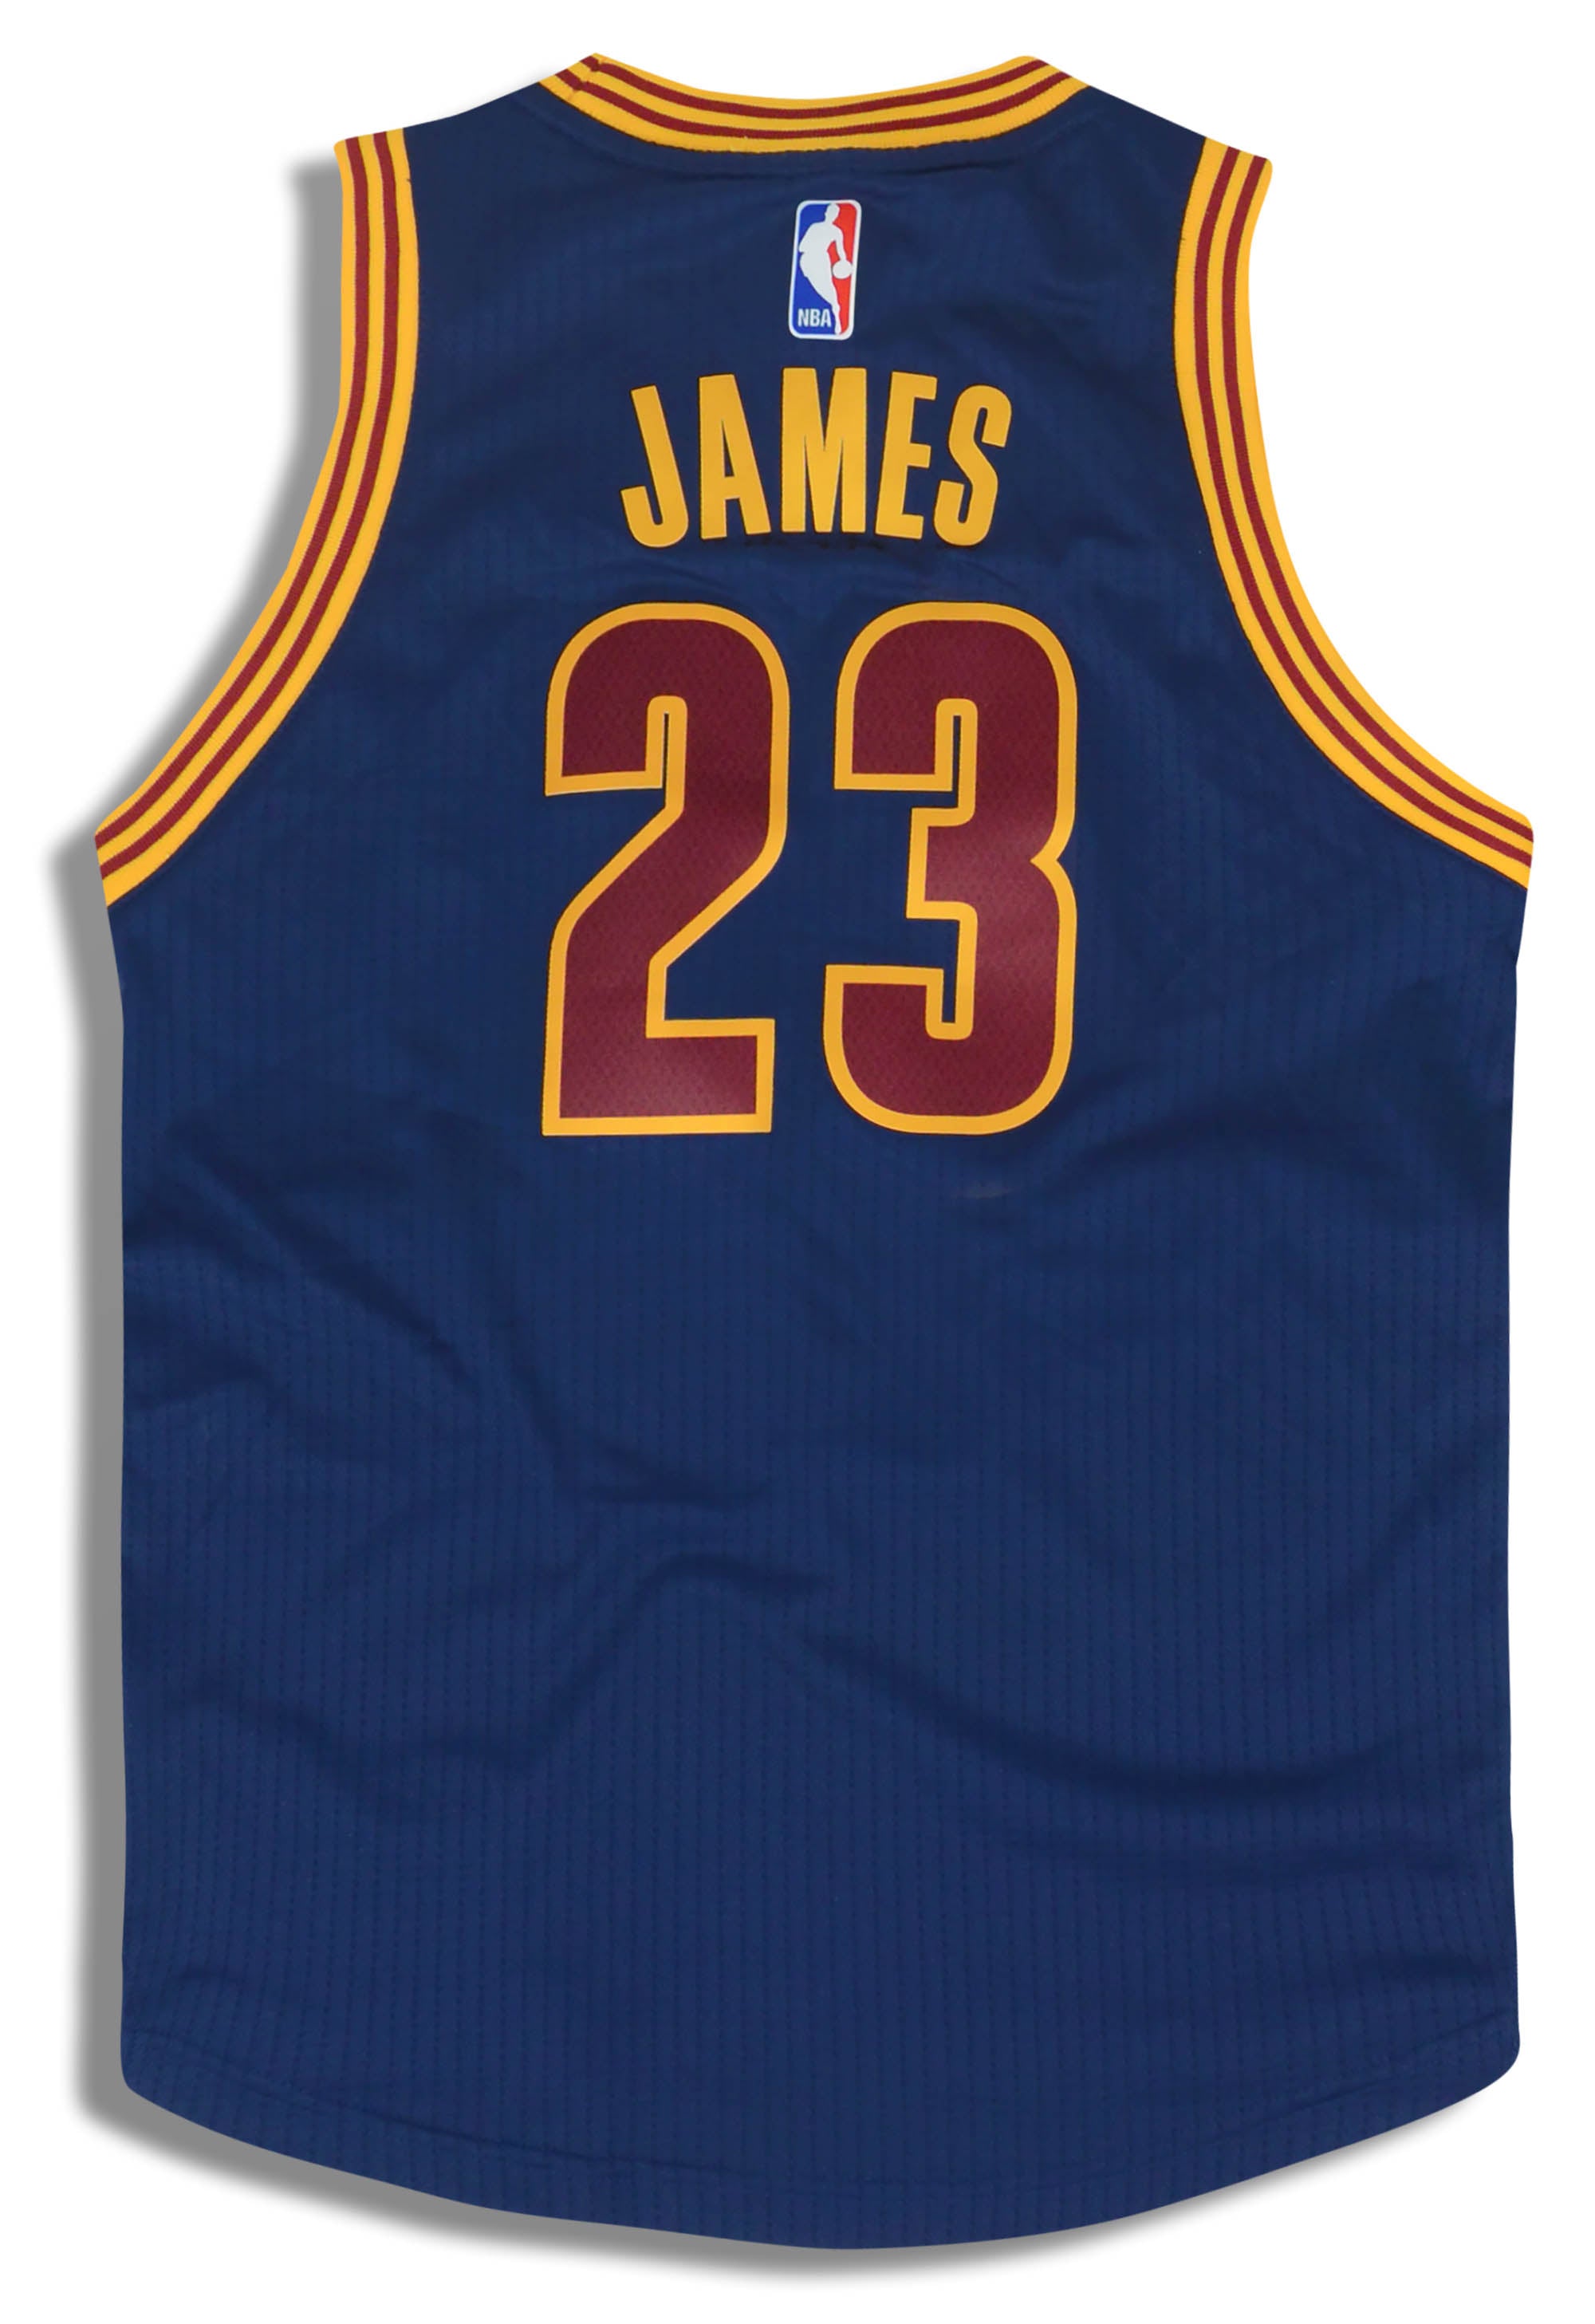 Adidas Lebron James #23 Cleveland Cavaliers Cavs Jersey Youth Size Small  Blue